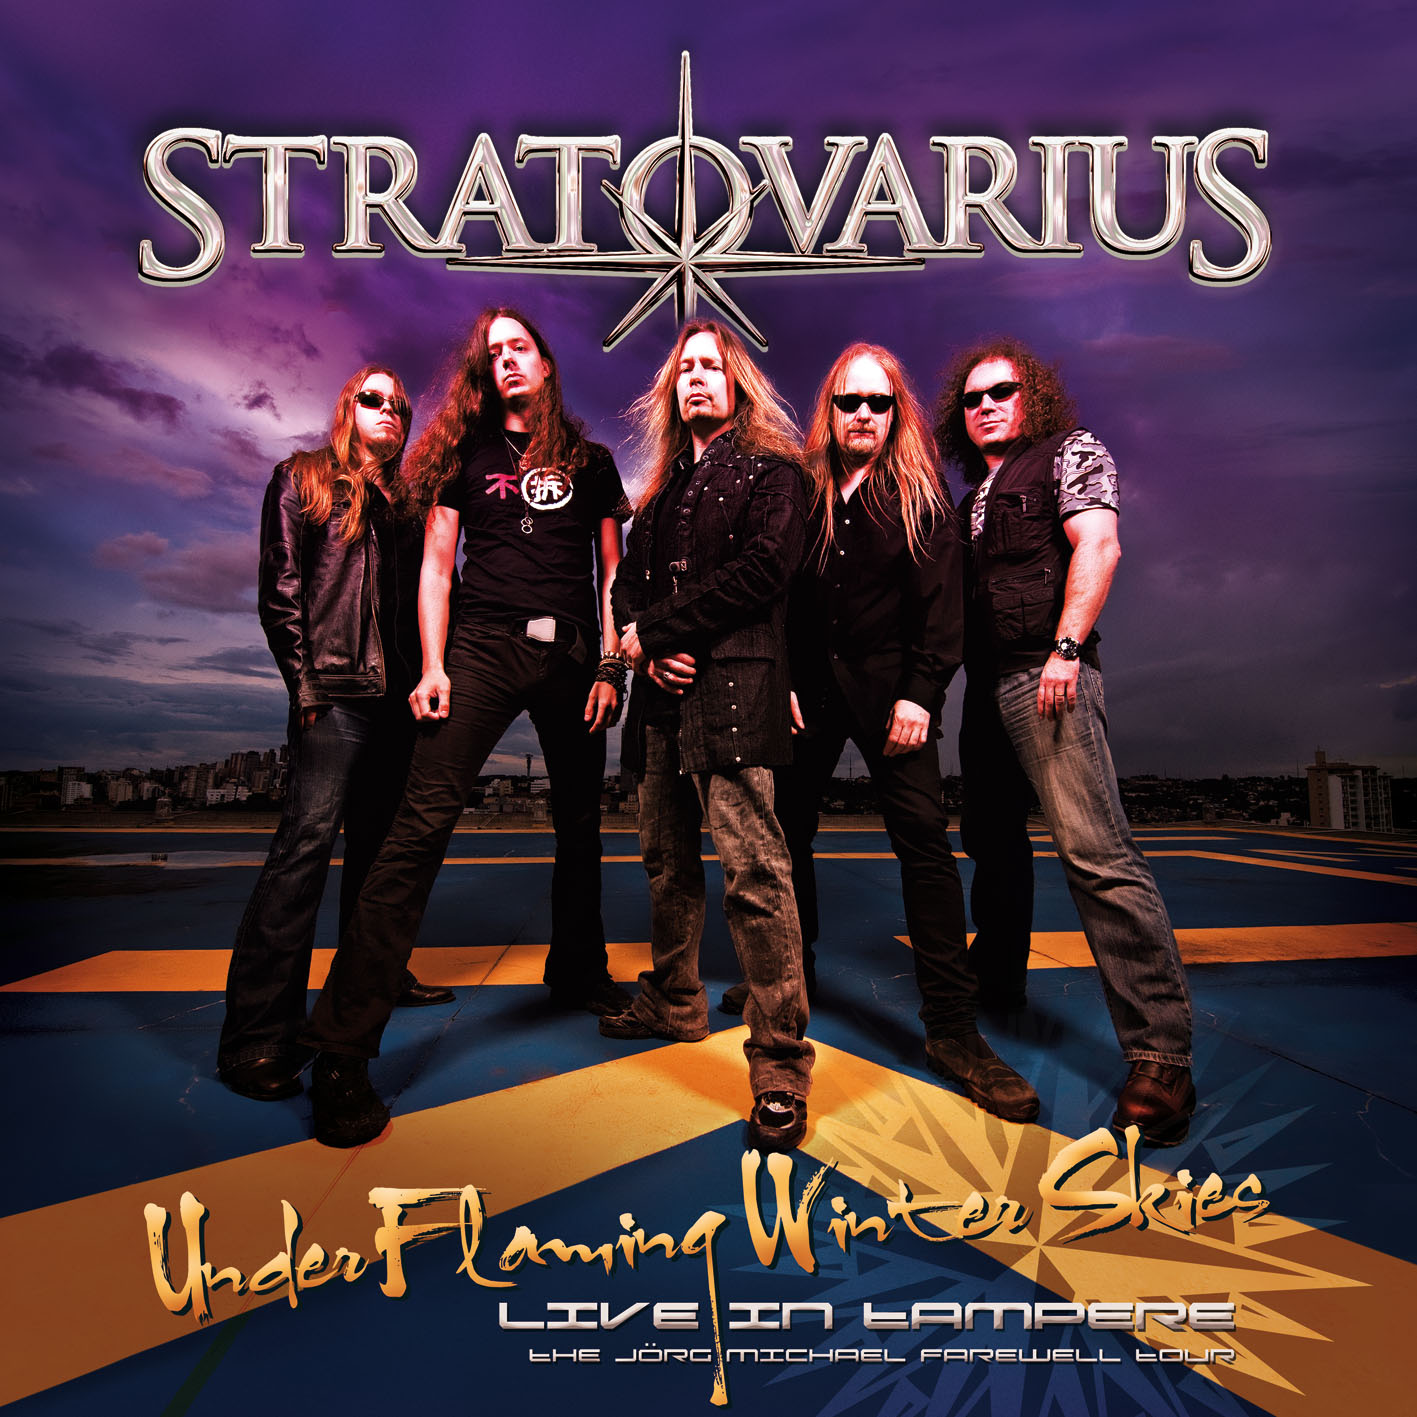 Stratovarius - Under Flaming Winter Skies - Live I - 2xCD